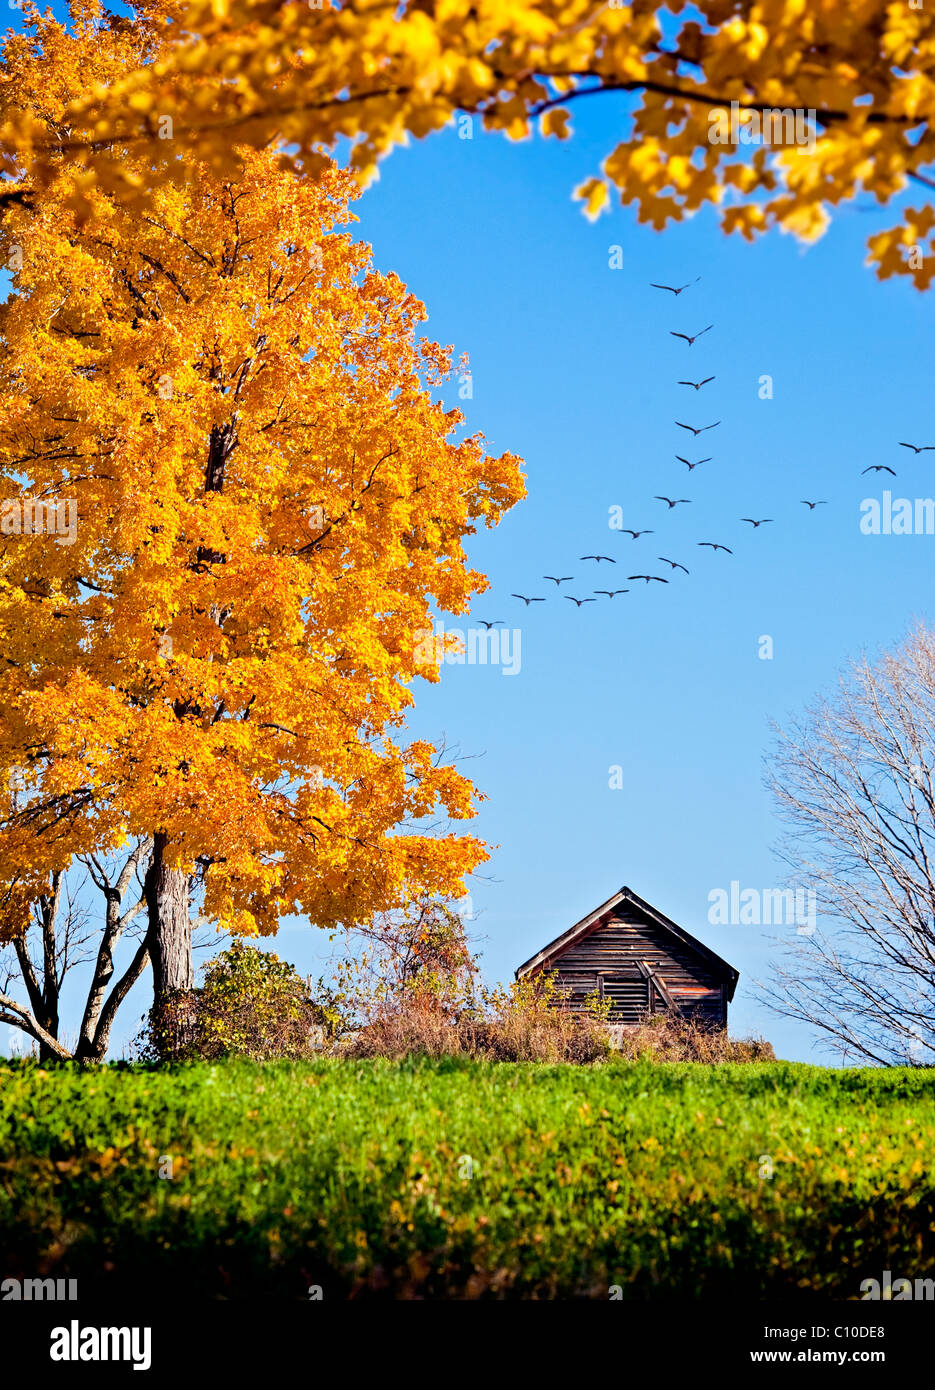 PASTORAL AUTUMN FALL SCENE WITH GOLD LEAVES, CABIN AND BIRDS FLYING IN FORMATION Stock Photo